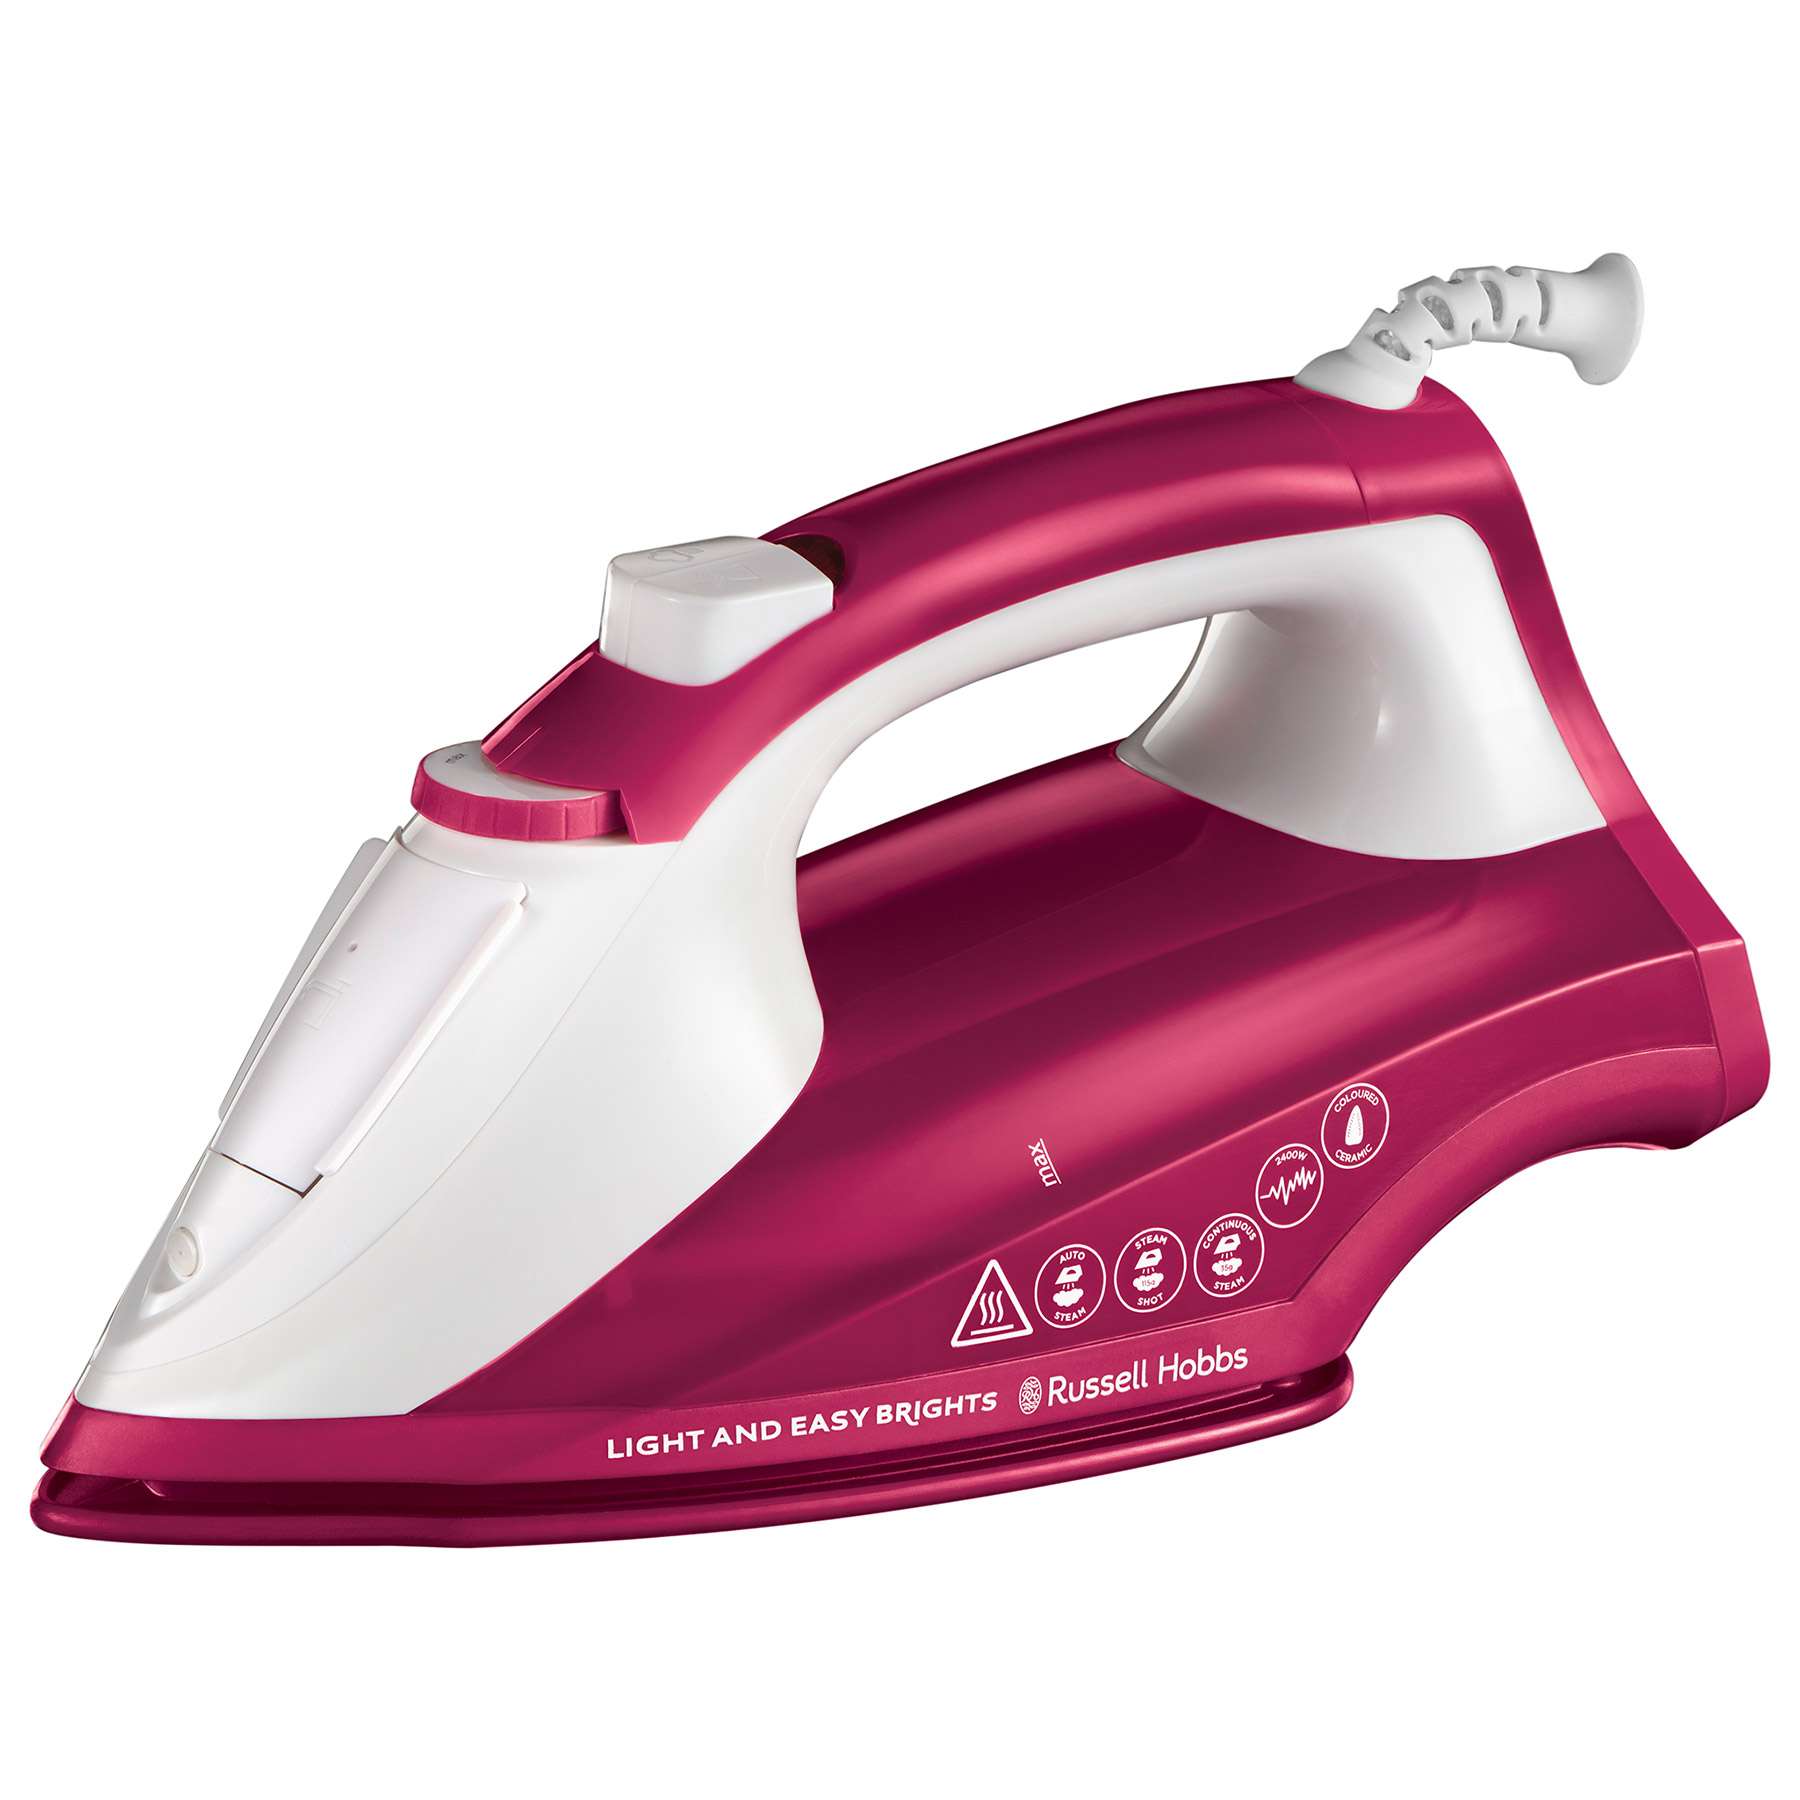 Image of Russell Hobbs 26480 Light Easy Brights Steam Iron in Berry